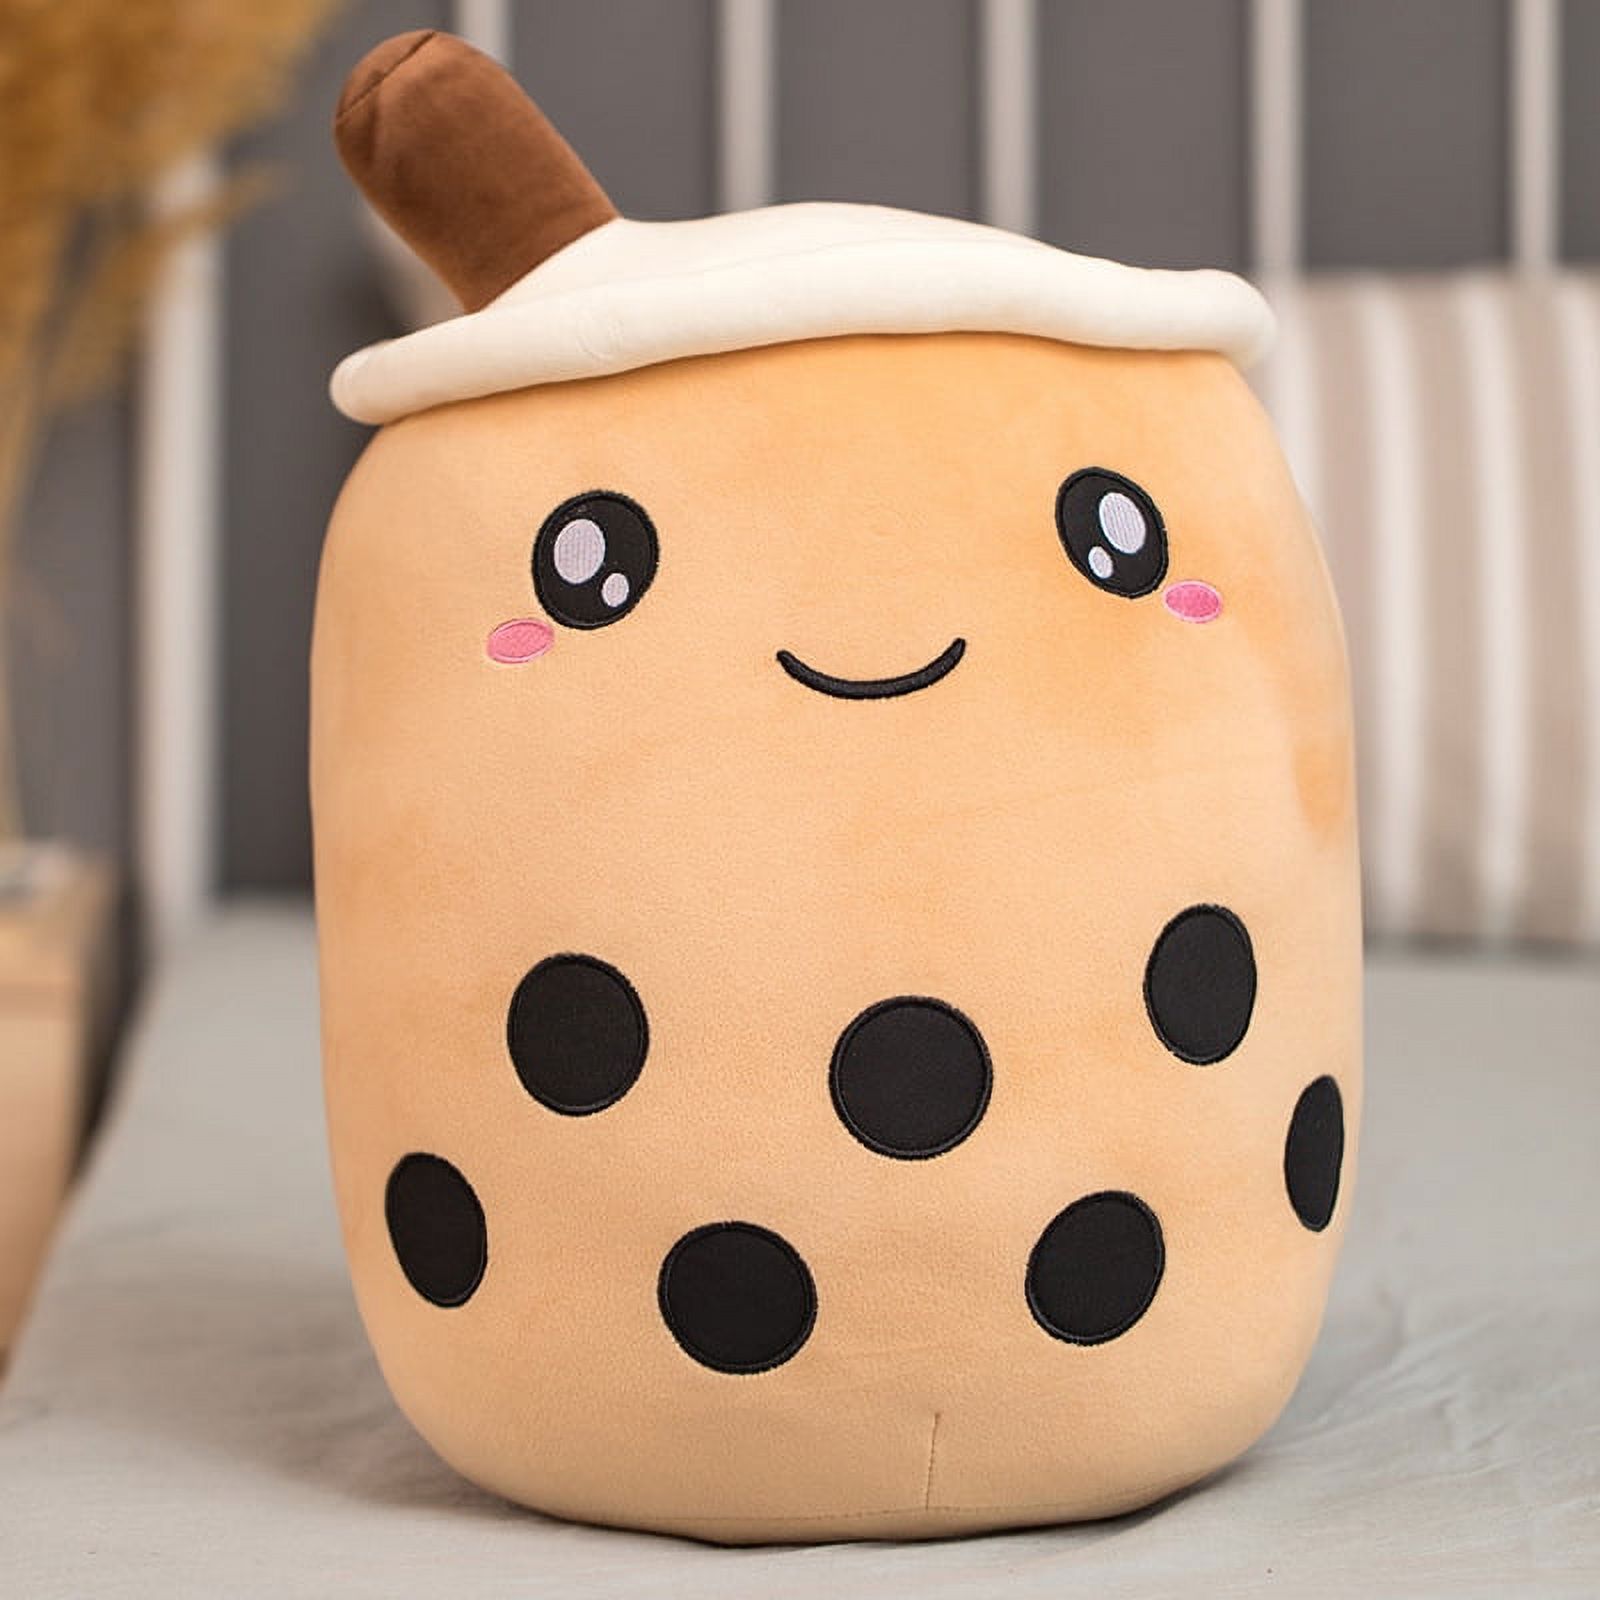 One opening Small Bubble Tea Toys, Soft Stuffed Fruit Juice Boba Milk Tea Plush Toy Birthday Gift for Adults Kids - image 1 of 1